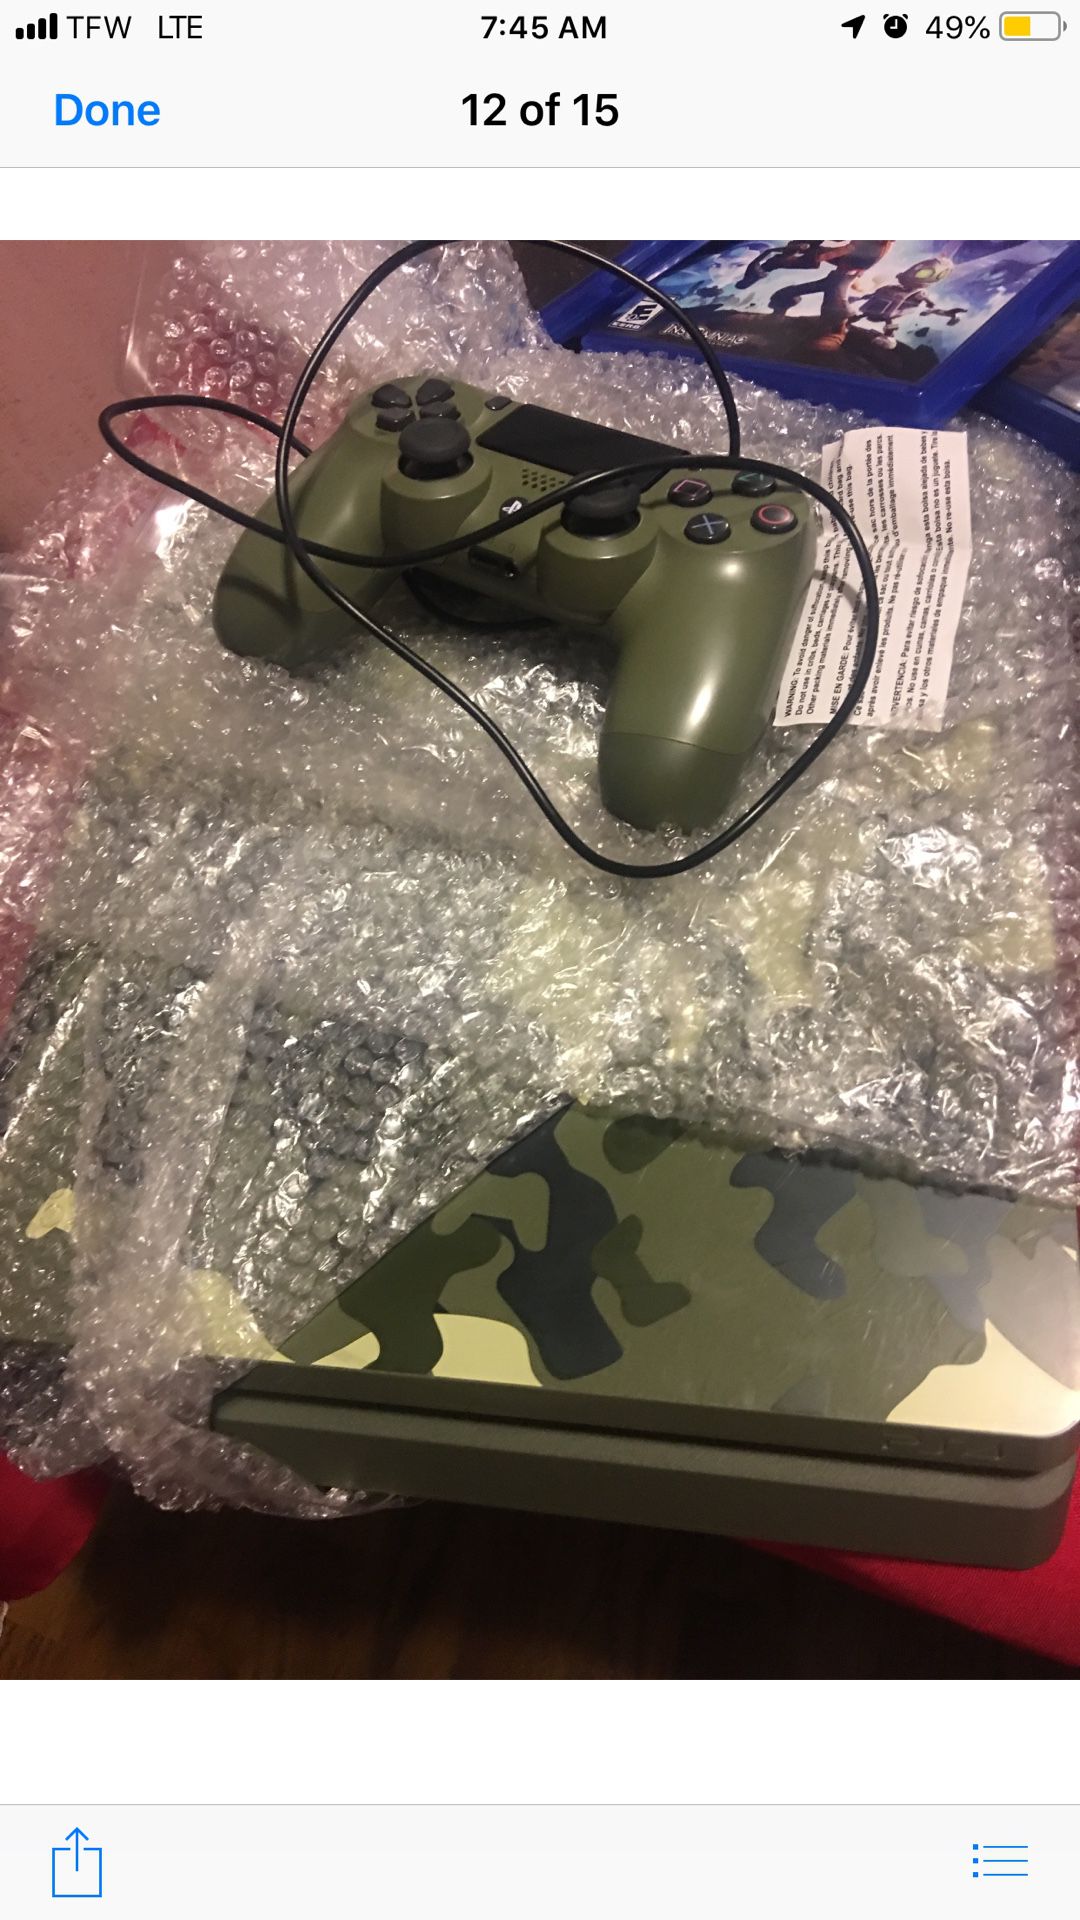 Sony Playstation 4 PS4 Slim Call of Duty: WWII Limited Edition Green Camouflage+6 Games+1 Controller+Gaming Headphones (Post Nintendo era)